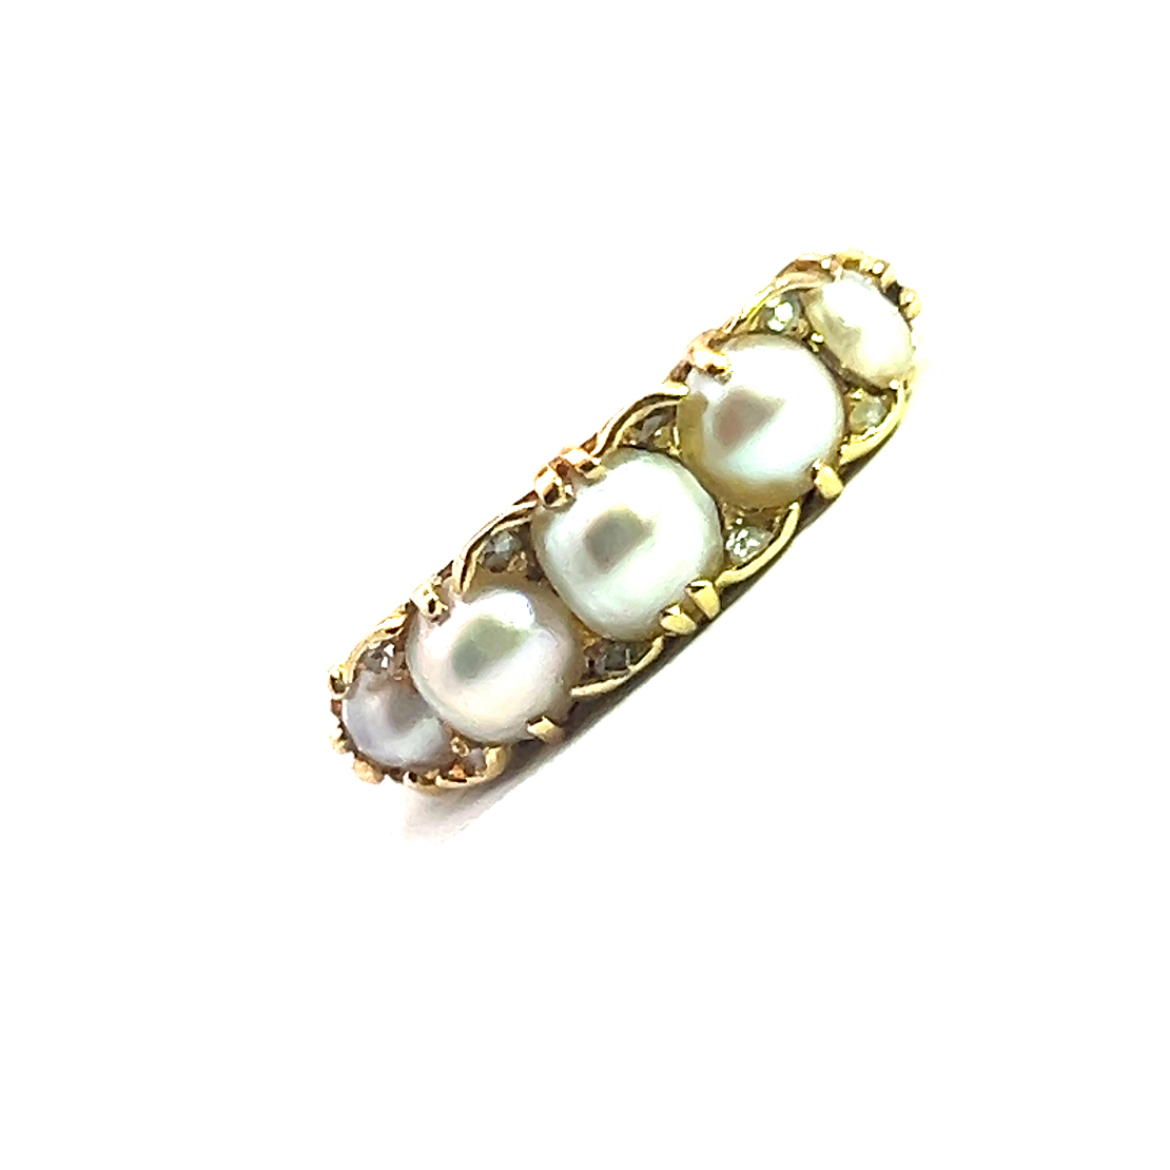 A beautiful Victorian Five Pearl Ring